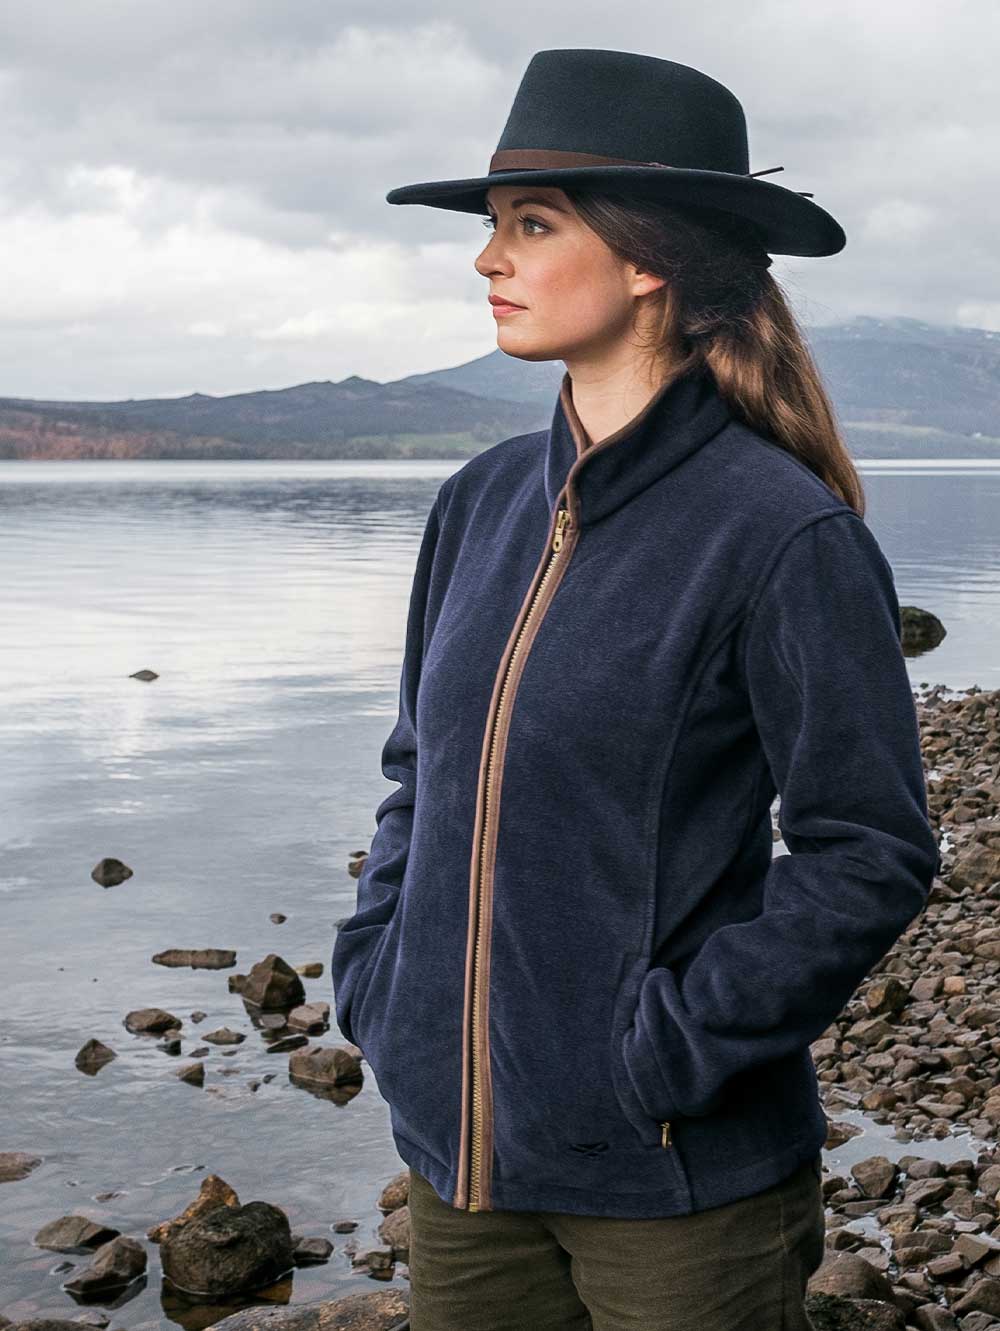 Women's Country Clothing: Smart, Stylish And Practical